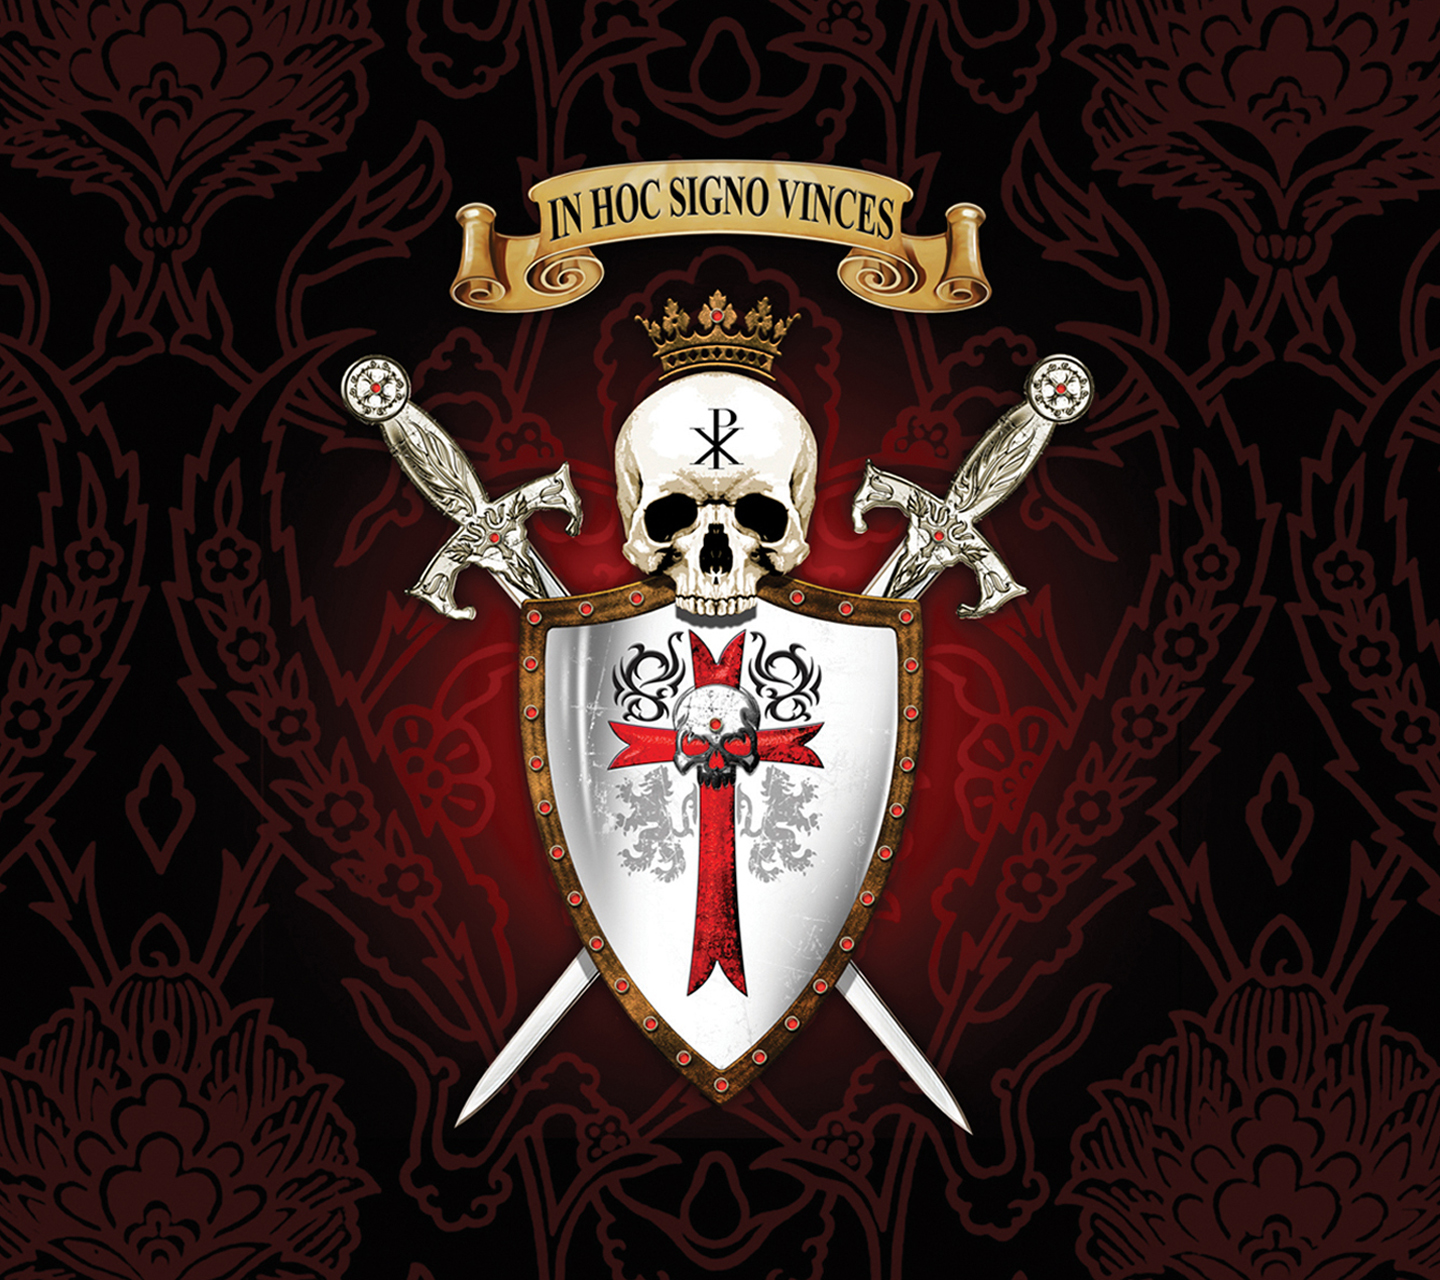 Free Download Sony Xperia A So 04e Decal Skin Knights Templar Shield 1440x1280 For Your Desktop Mobile Tablet Explore 73 Knight Templar Wallpaper Masonic Knights Templar Wallpaper Templar Wallpaper